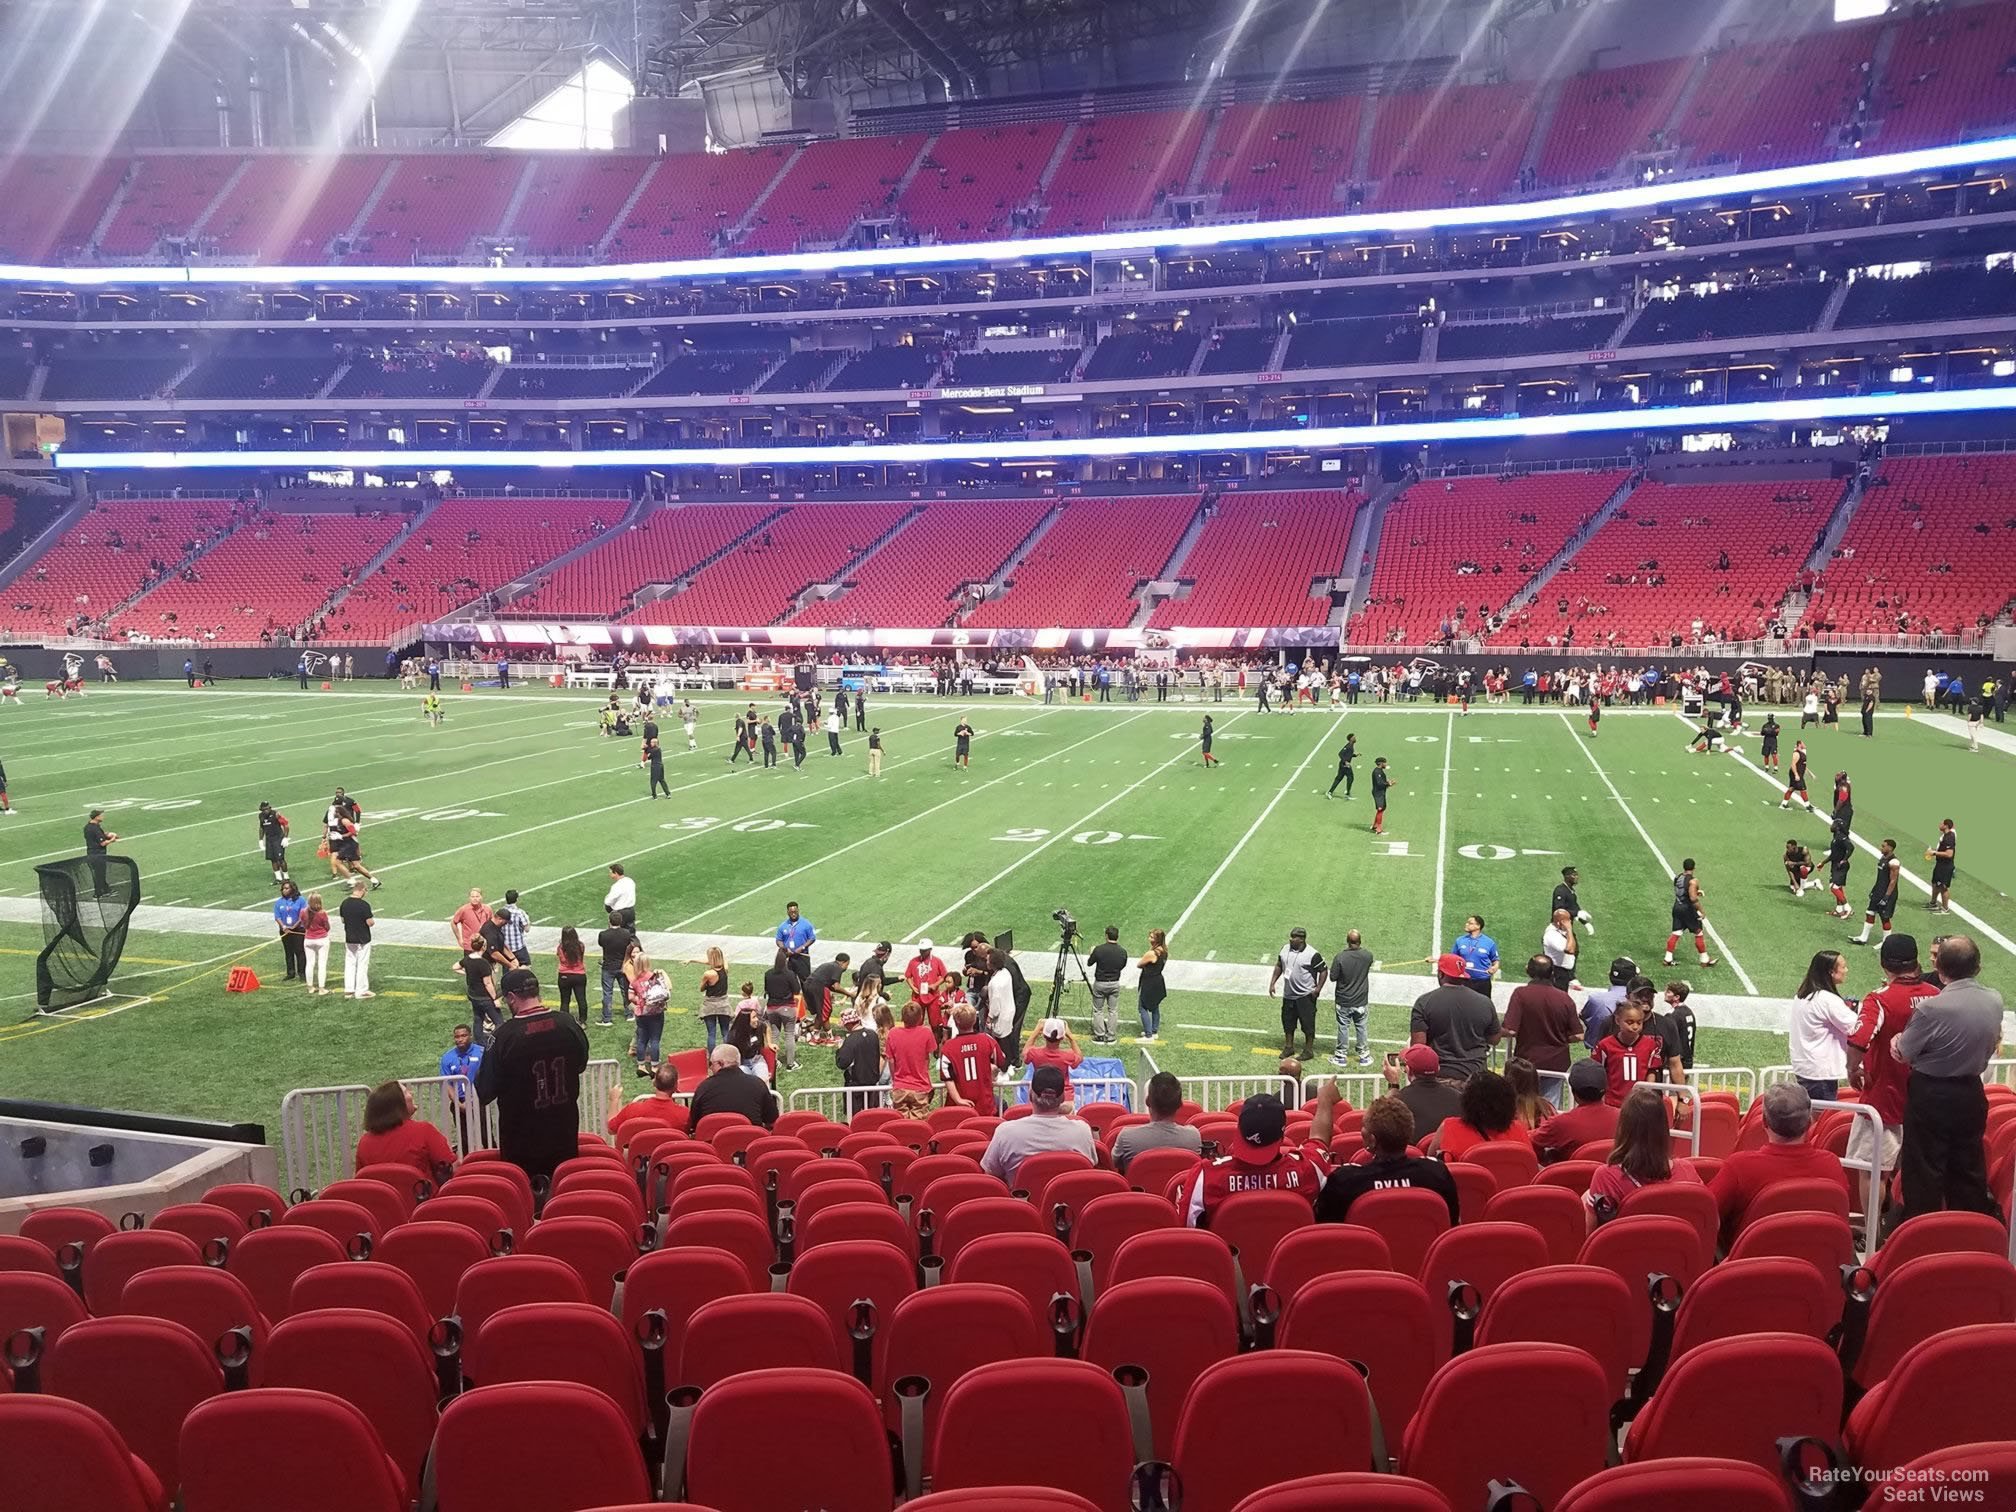 section 125, row 15 seat view  for football - mercedes-benz stadium